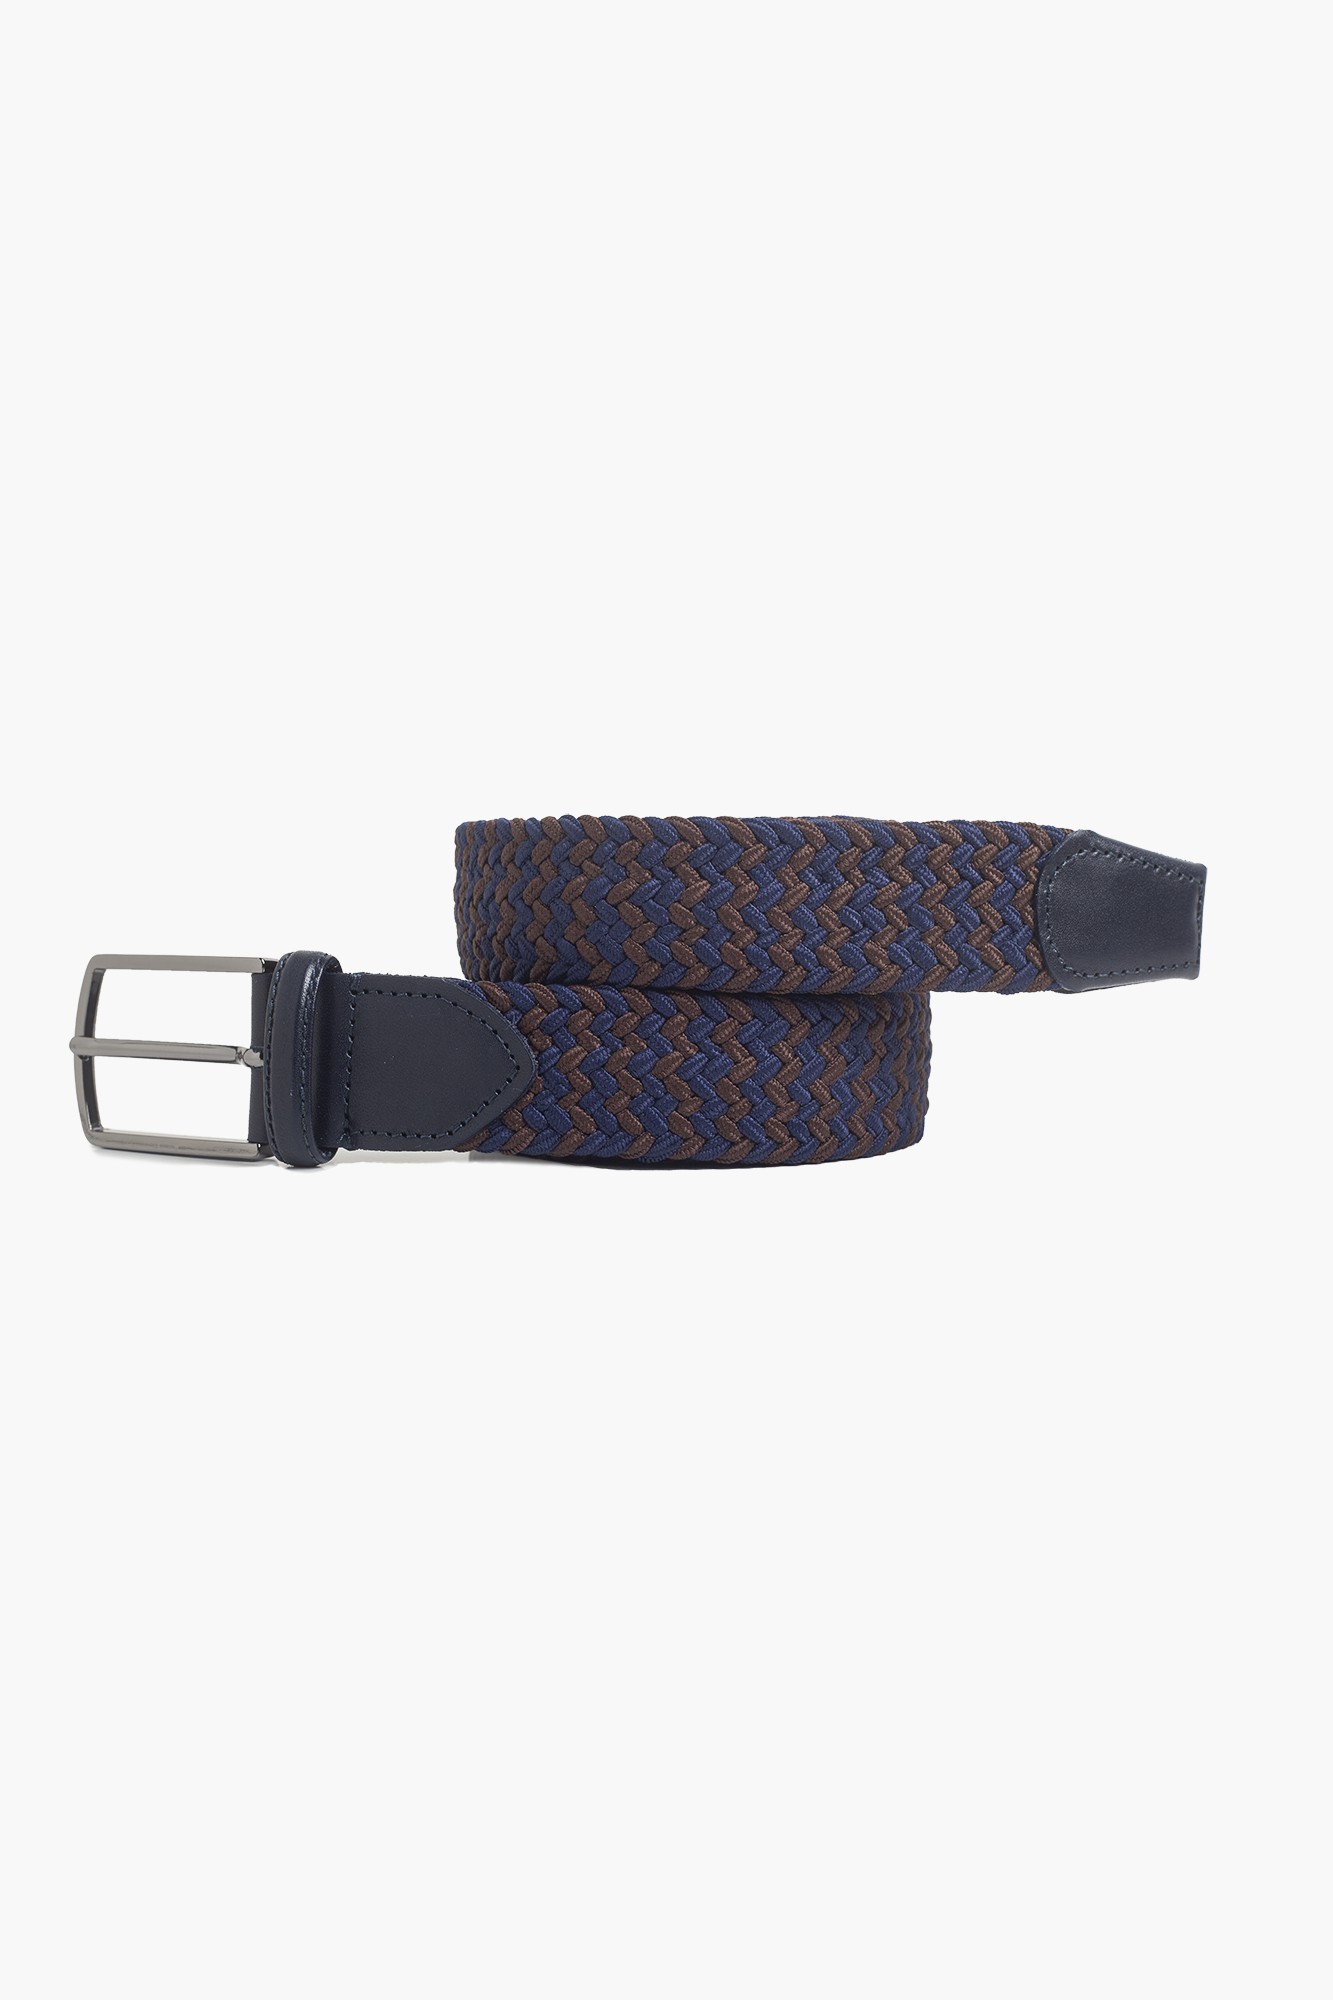 Elastic Knit Belt with Genuine Leather - Navy Brown